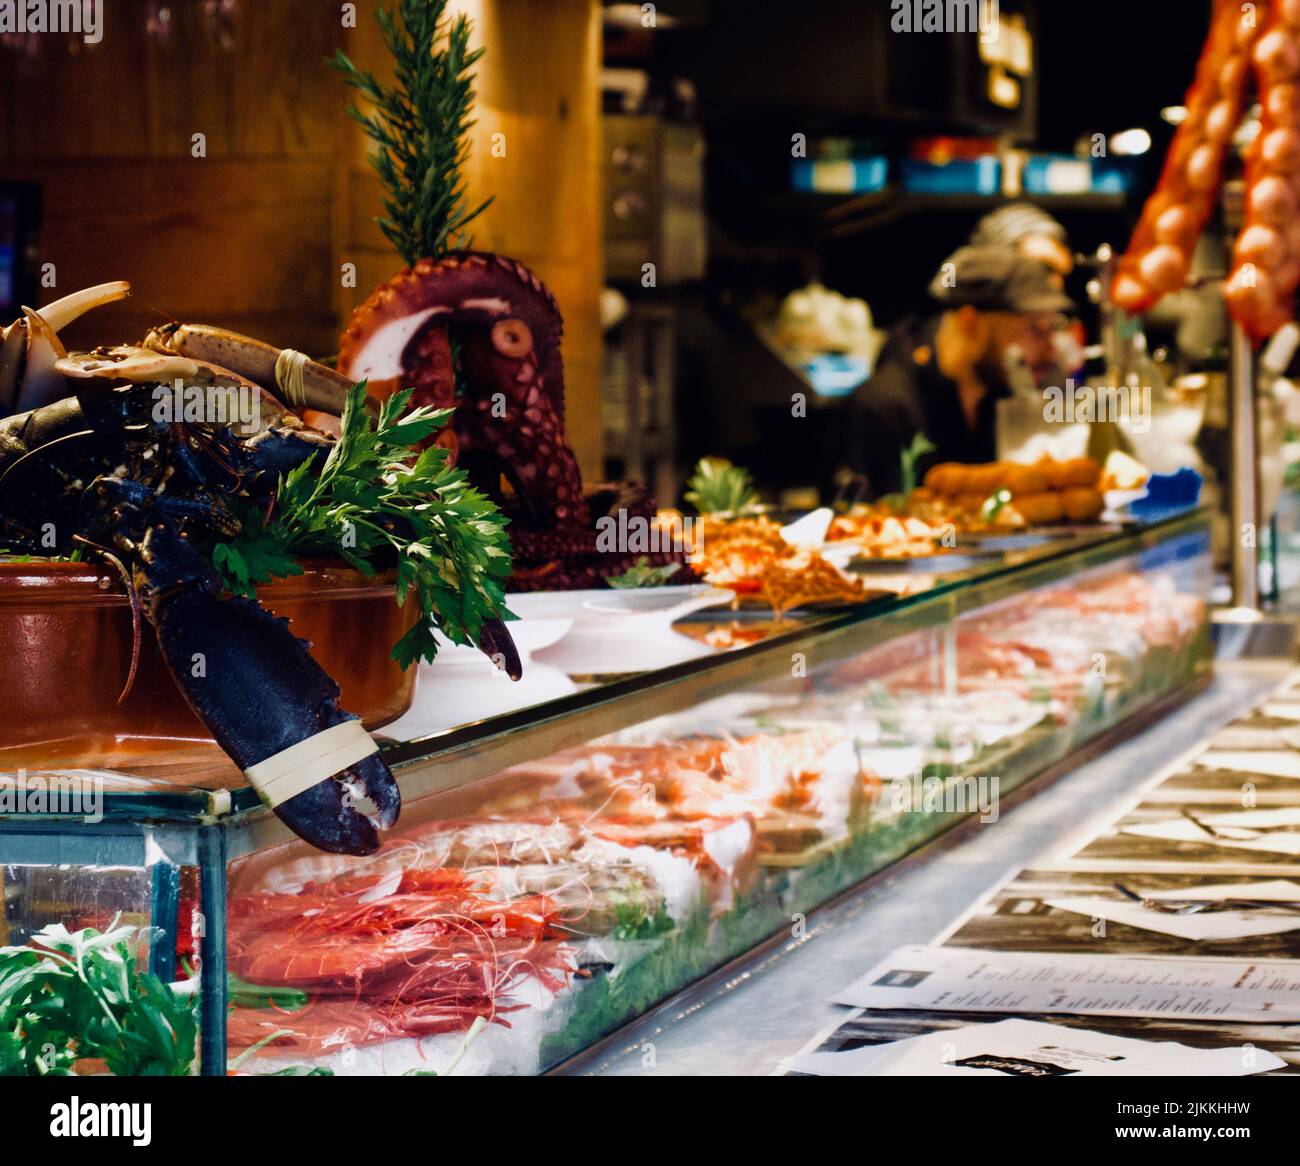 A refrigerated display case with seafood in the supermarket Stock Photo